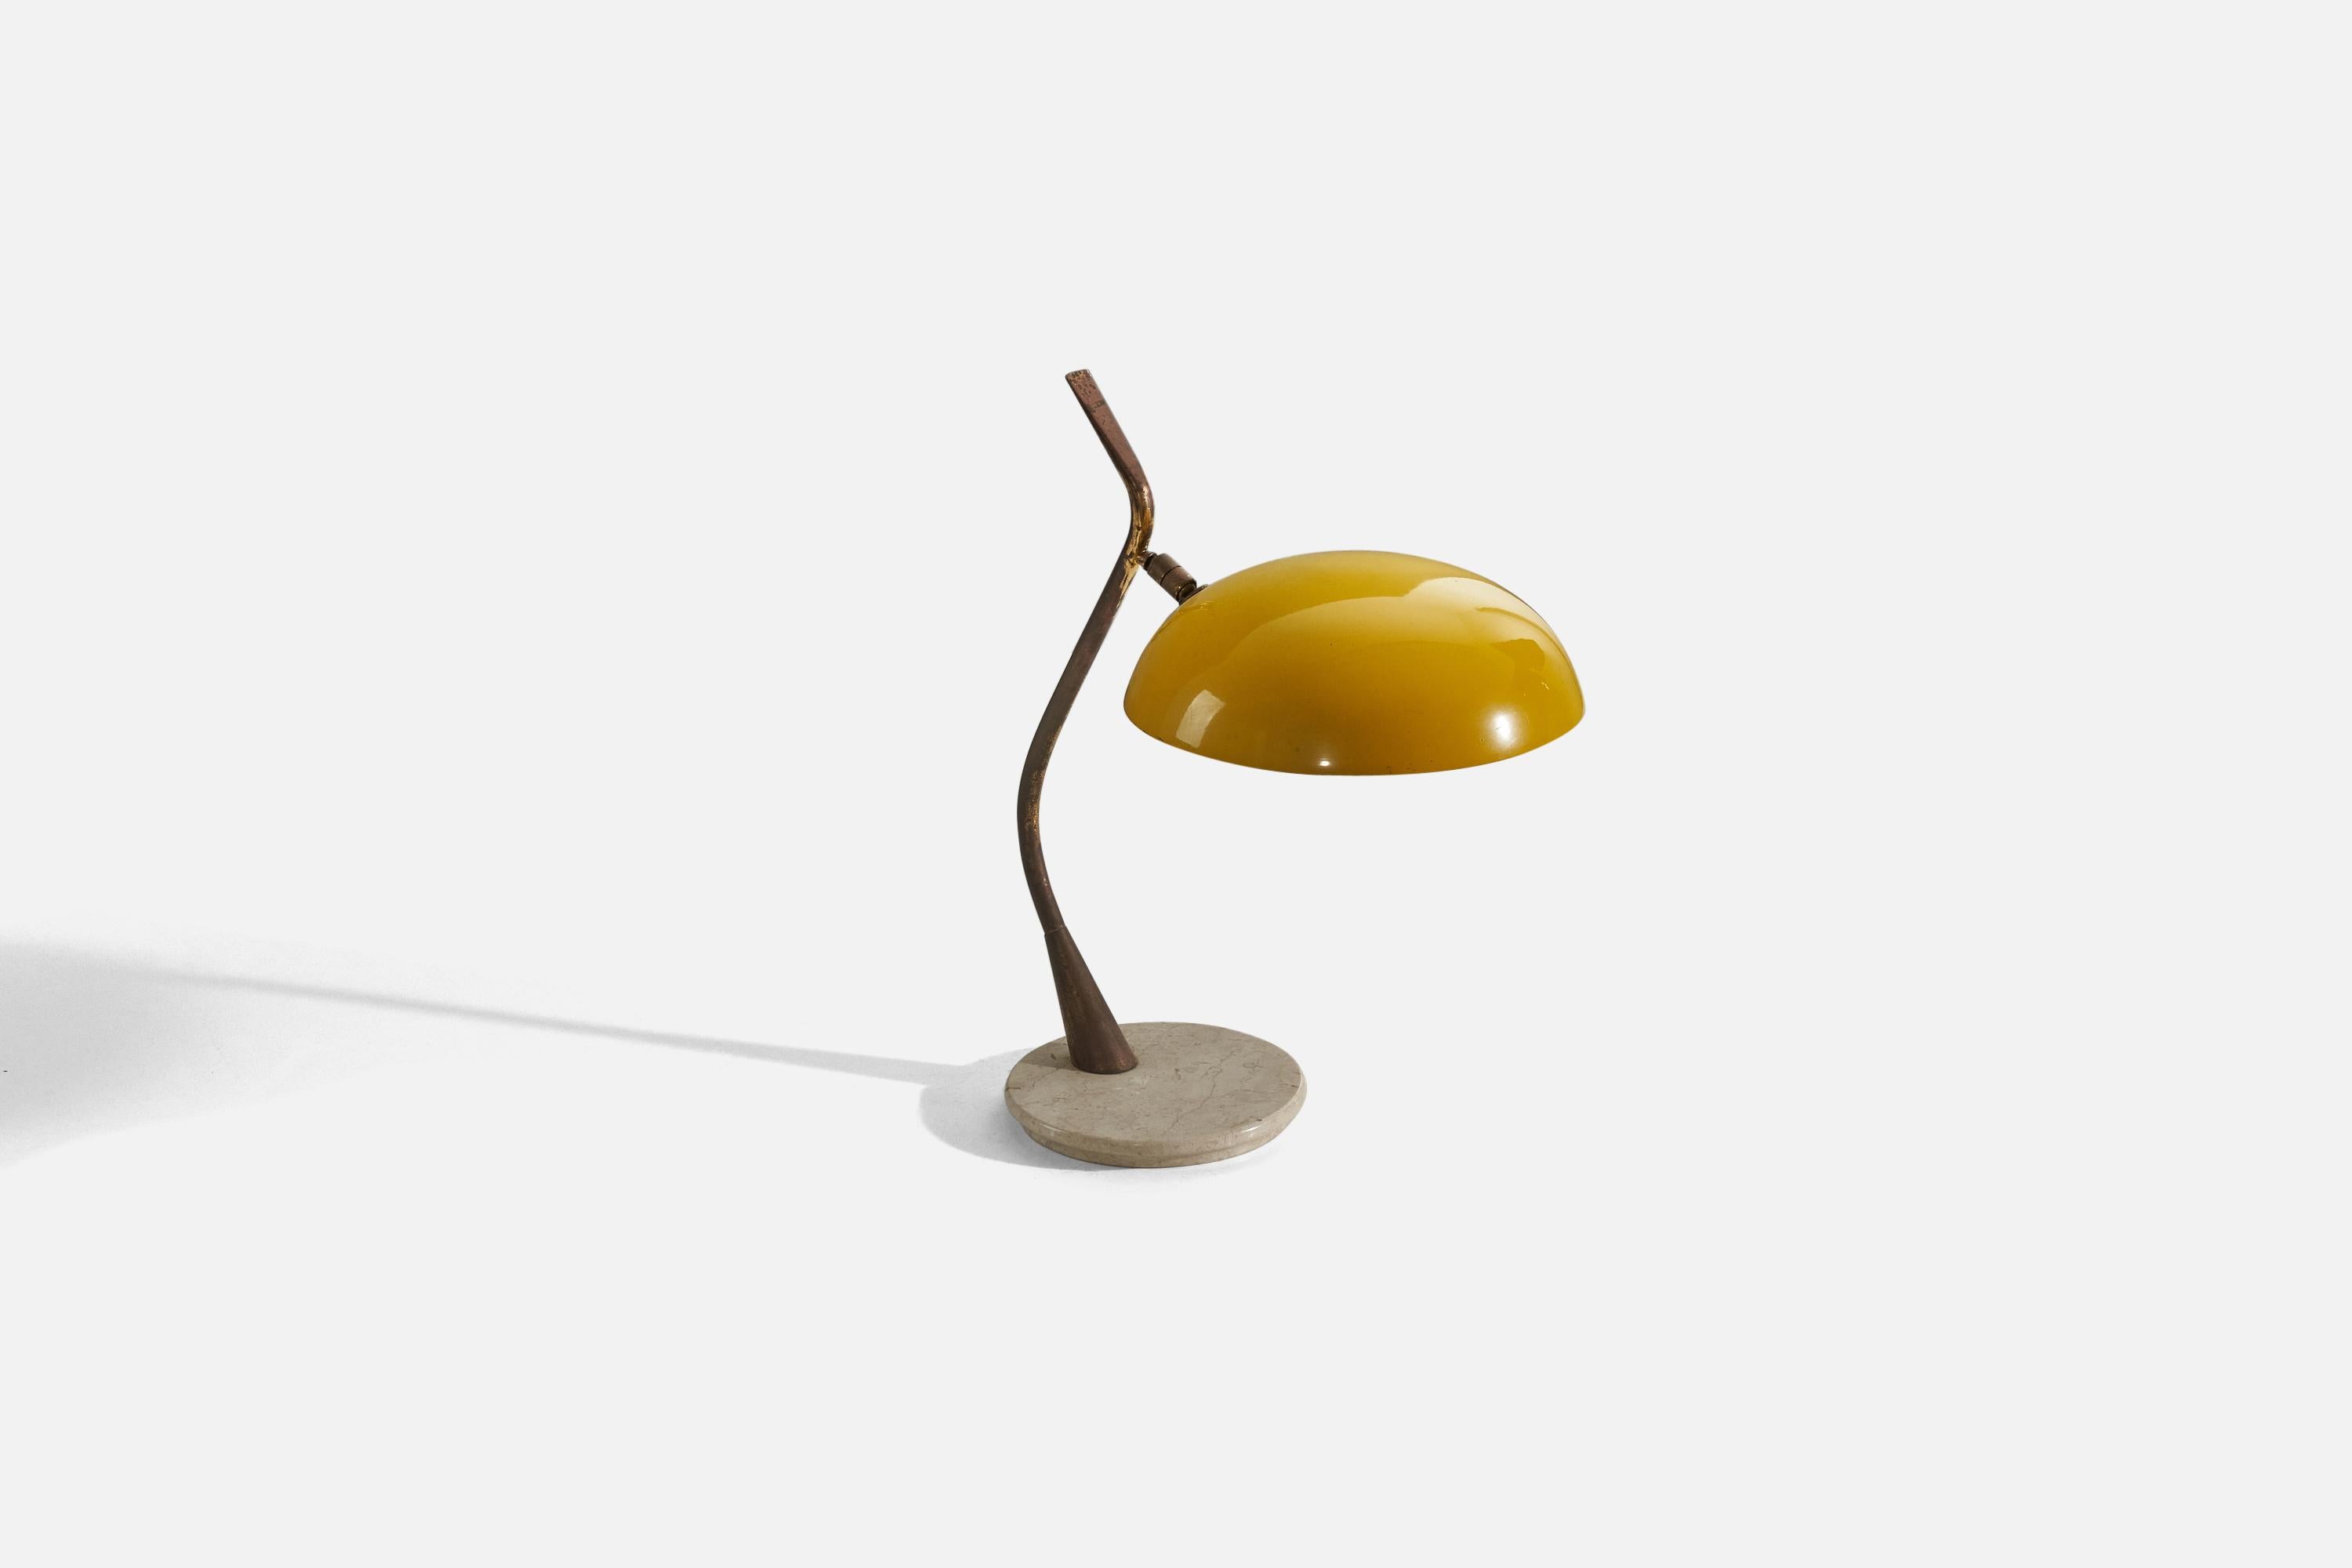 A brass, metal and marble table lamp, designed and produced by an Italian designer, Italy, 1950s.

Variable dimensions, measured as illustrated in the first image.